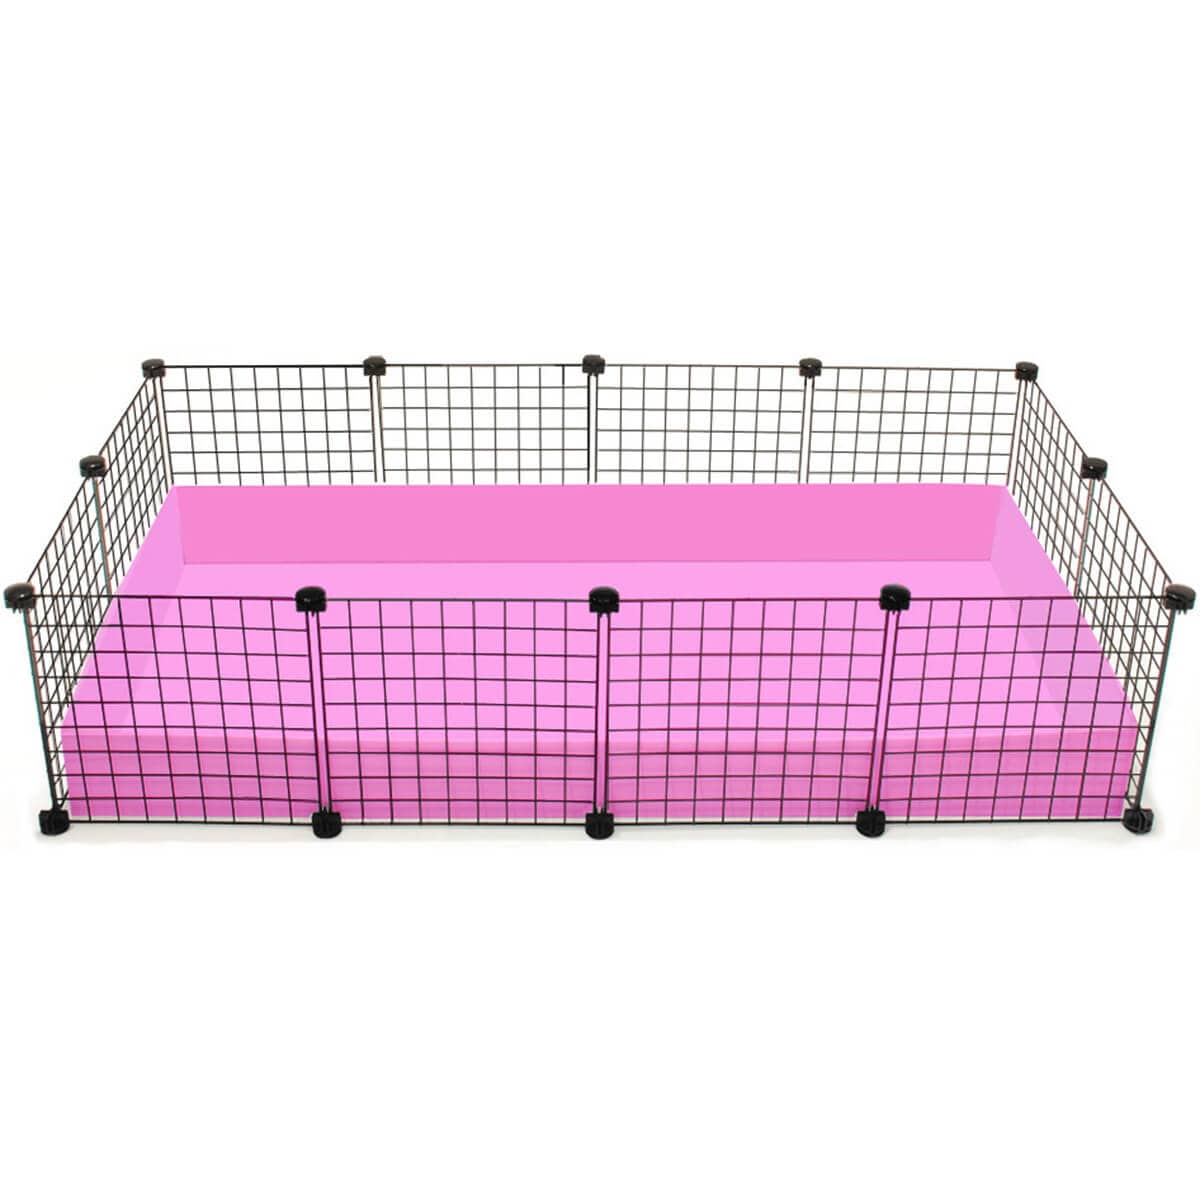 Large pink C&C guinea pig cage with black grids and connectors